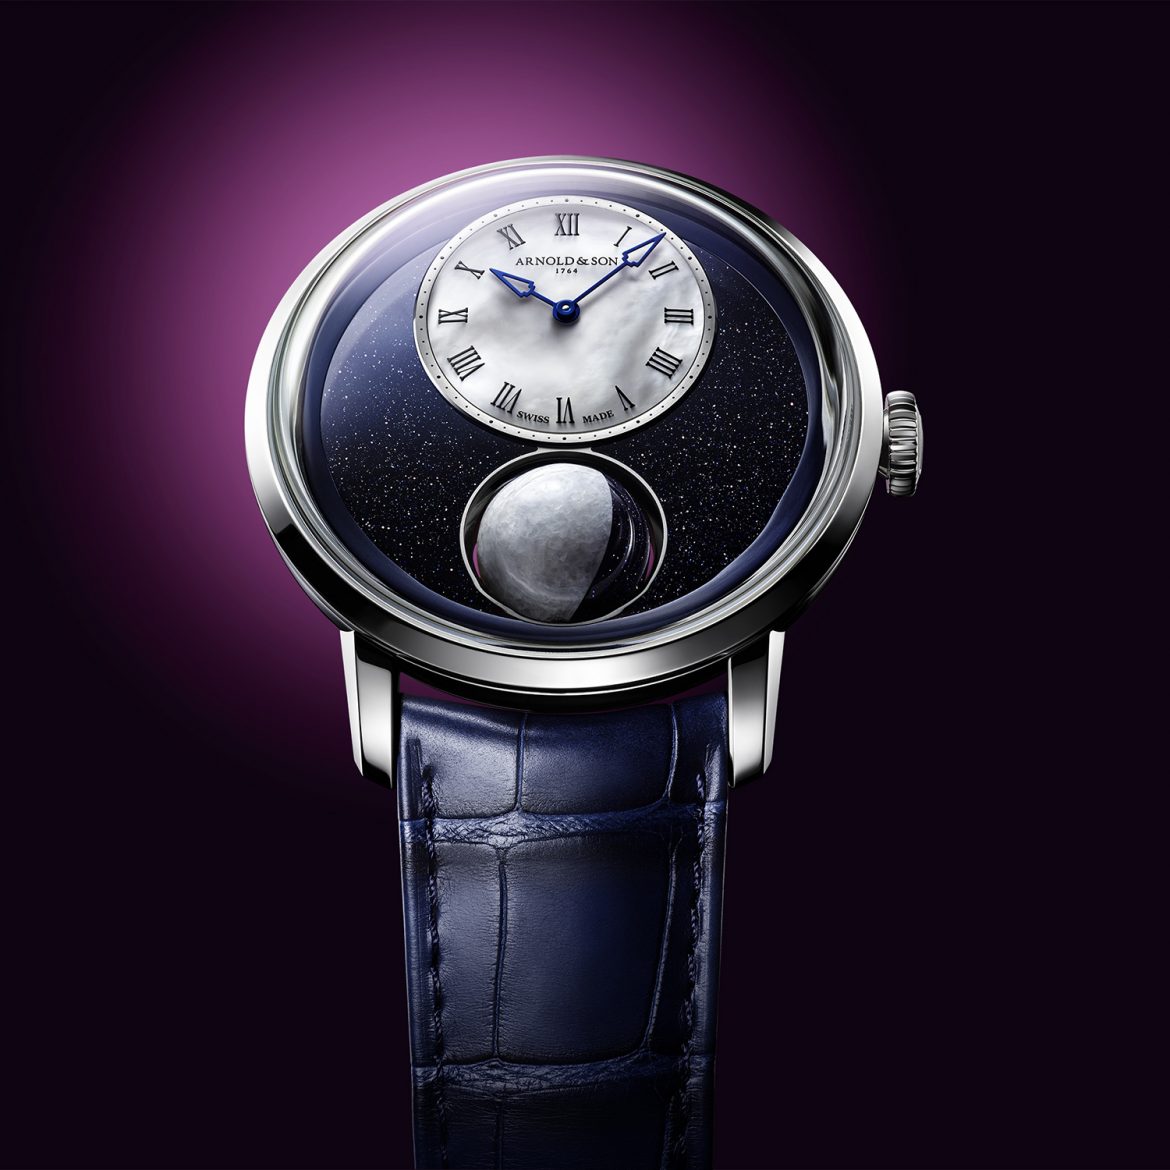 Arnold & Son’s Luna Magna Platinum Moonlight Chiaroscuro Brings in the Magic of the Moon to Horology